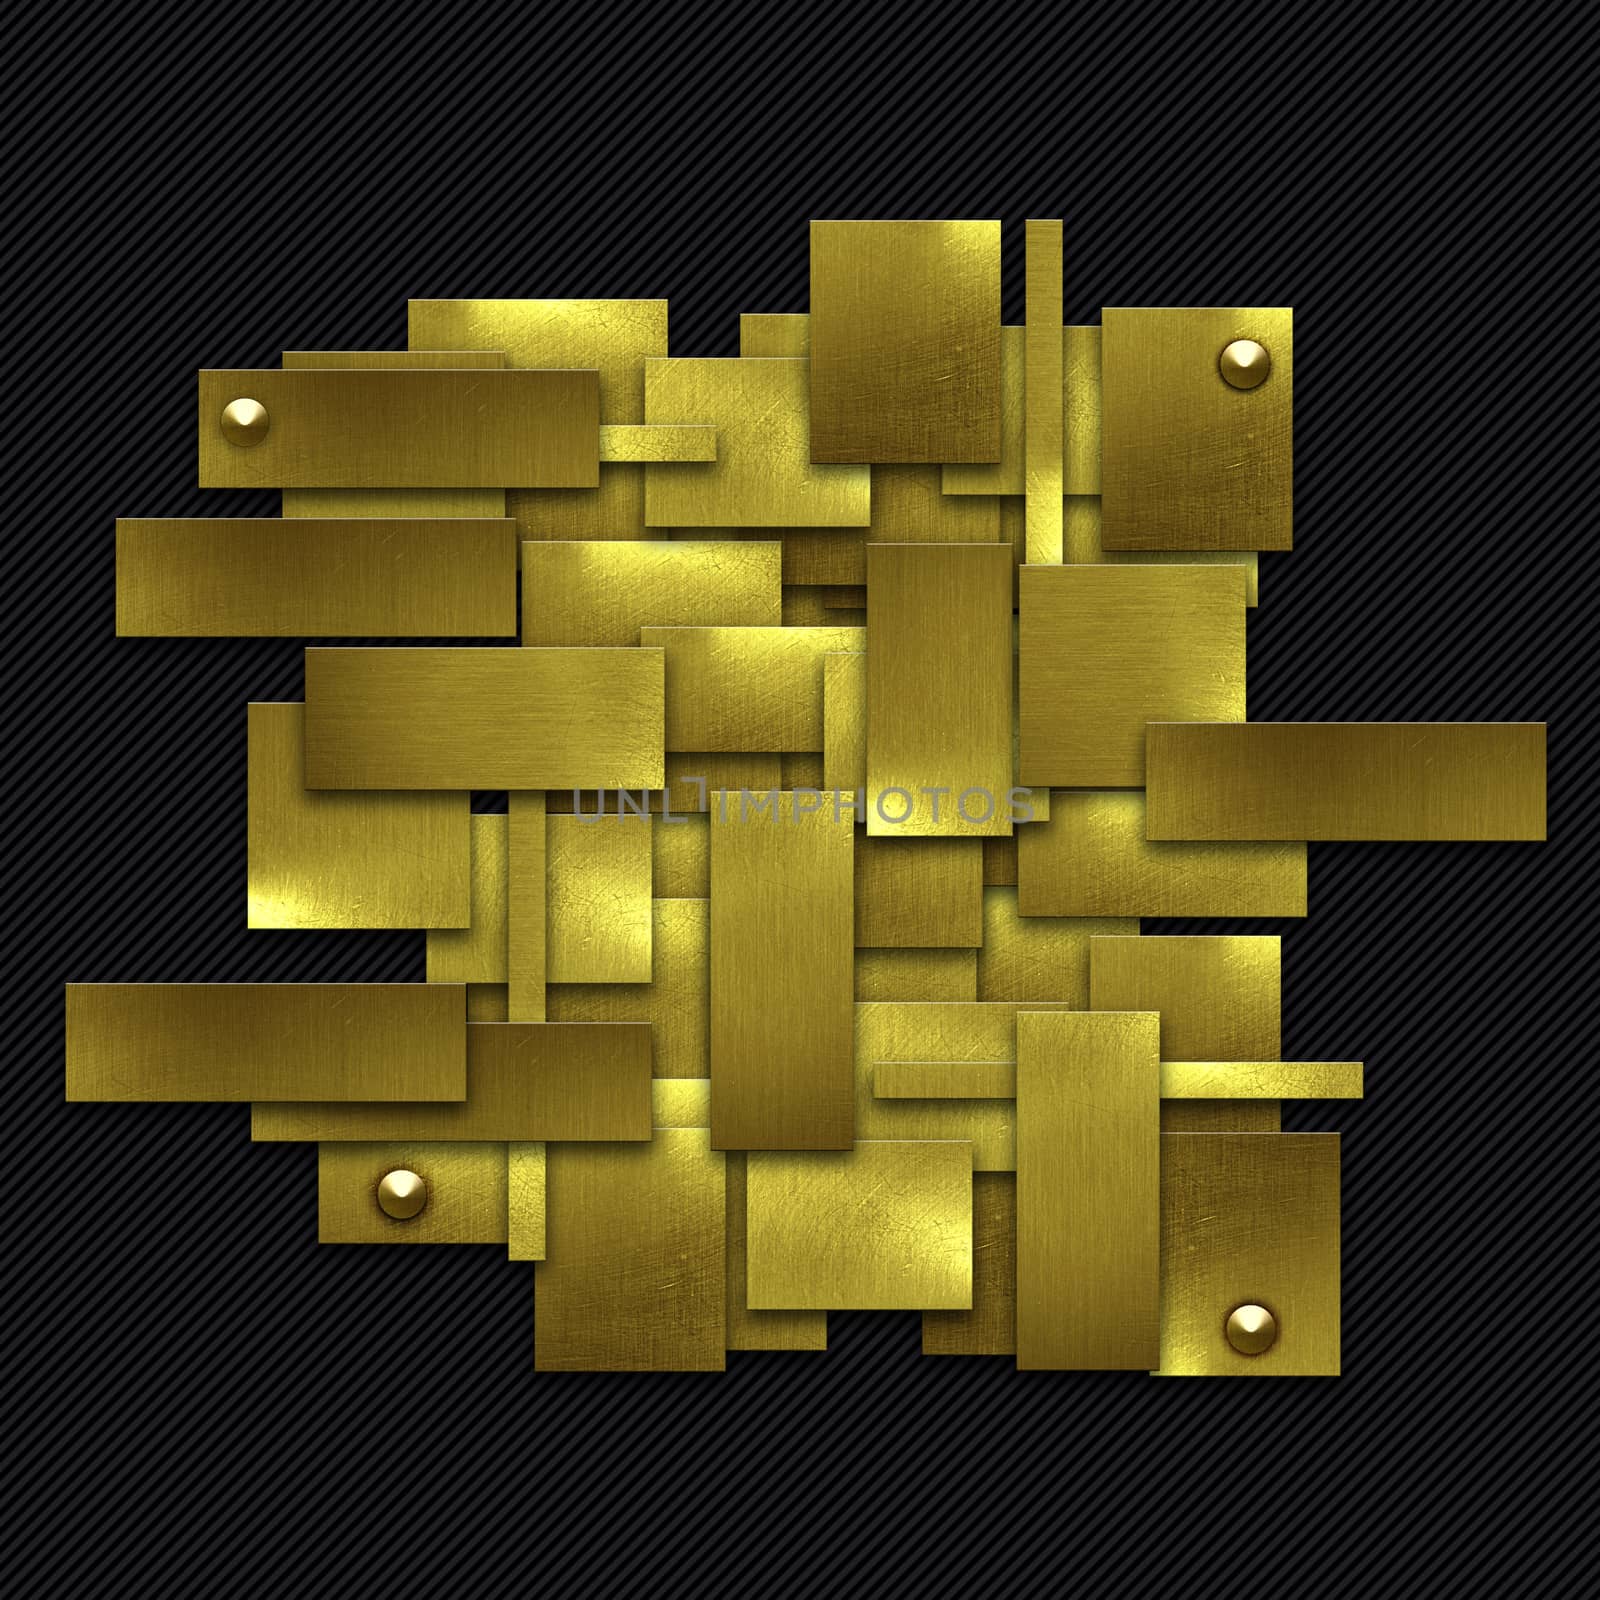 shiny gold fix wall on black carbon fiber. gold background and texture. 3d illustration.